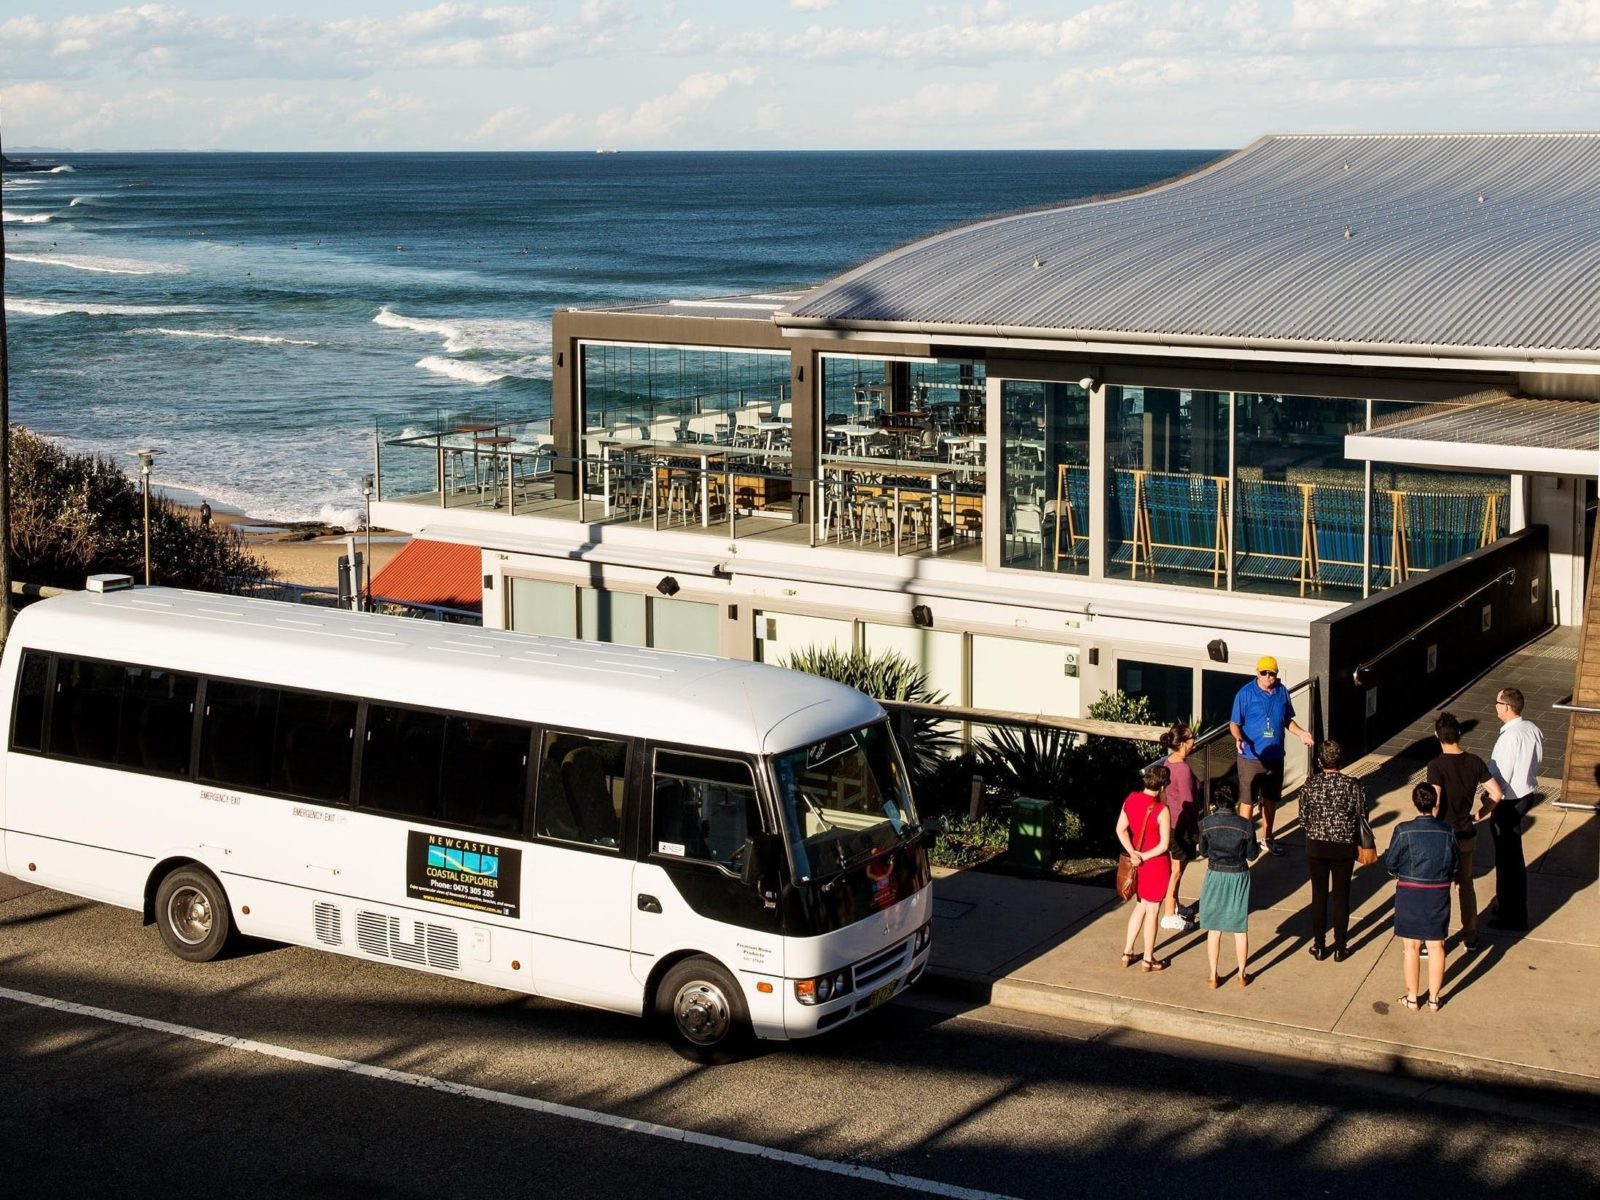 Newcastle’s most popular provider of sightseeing tours and shore excursions